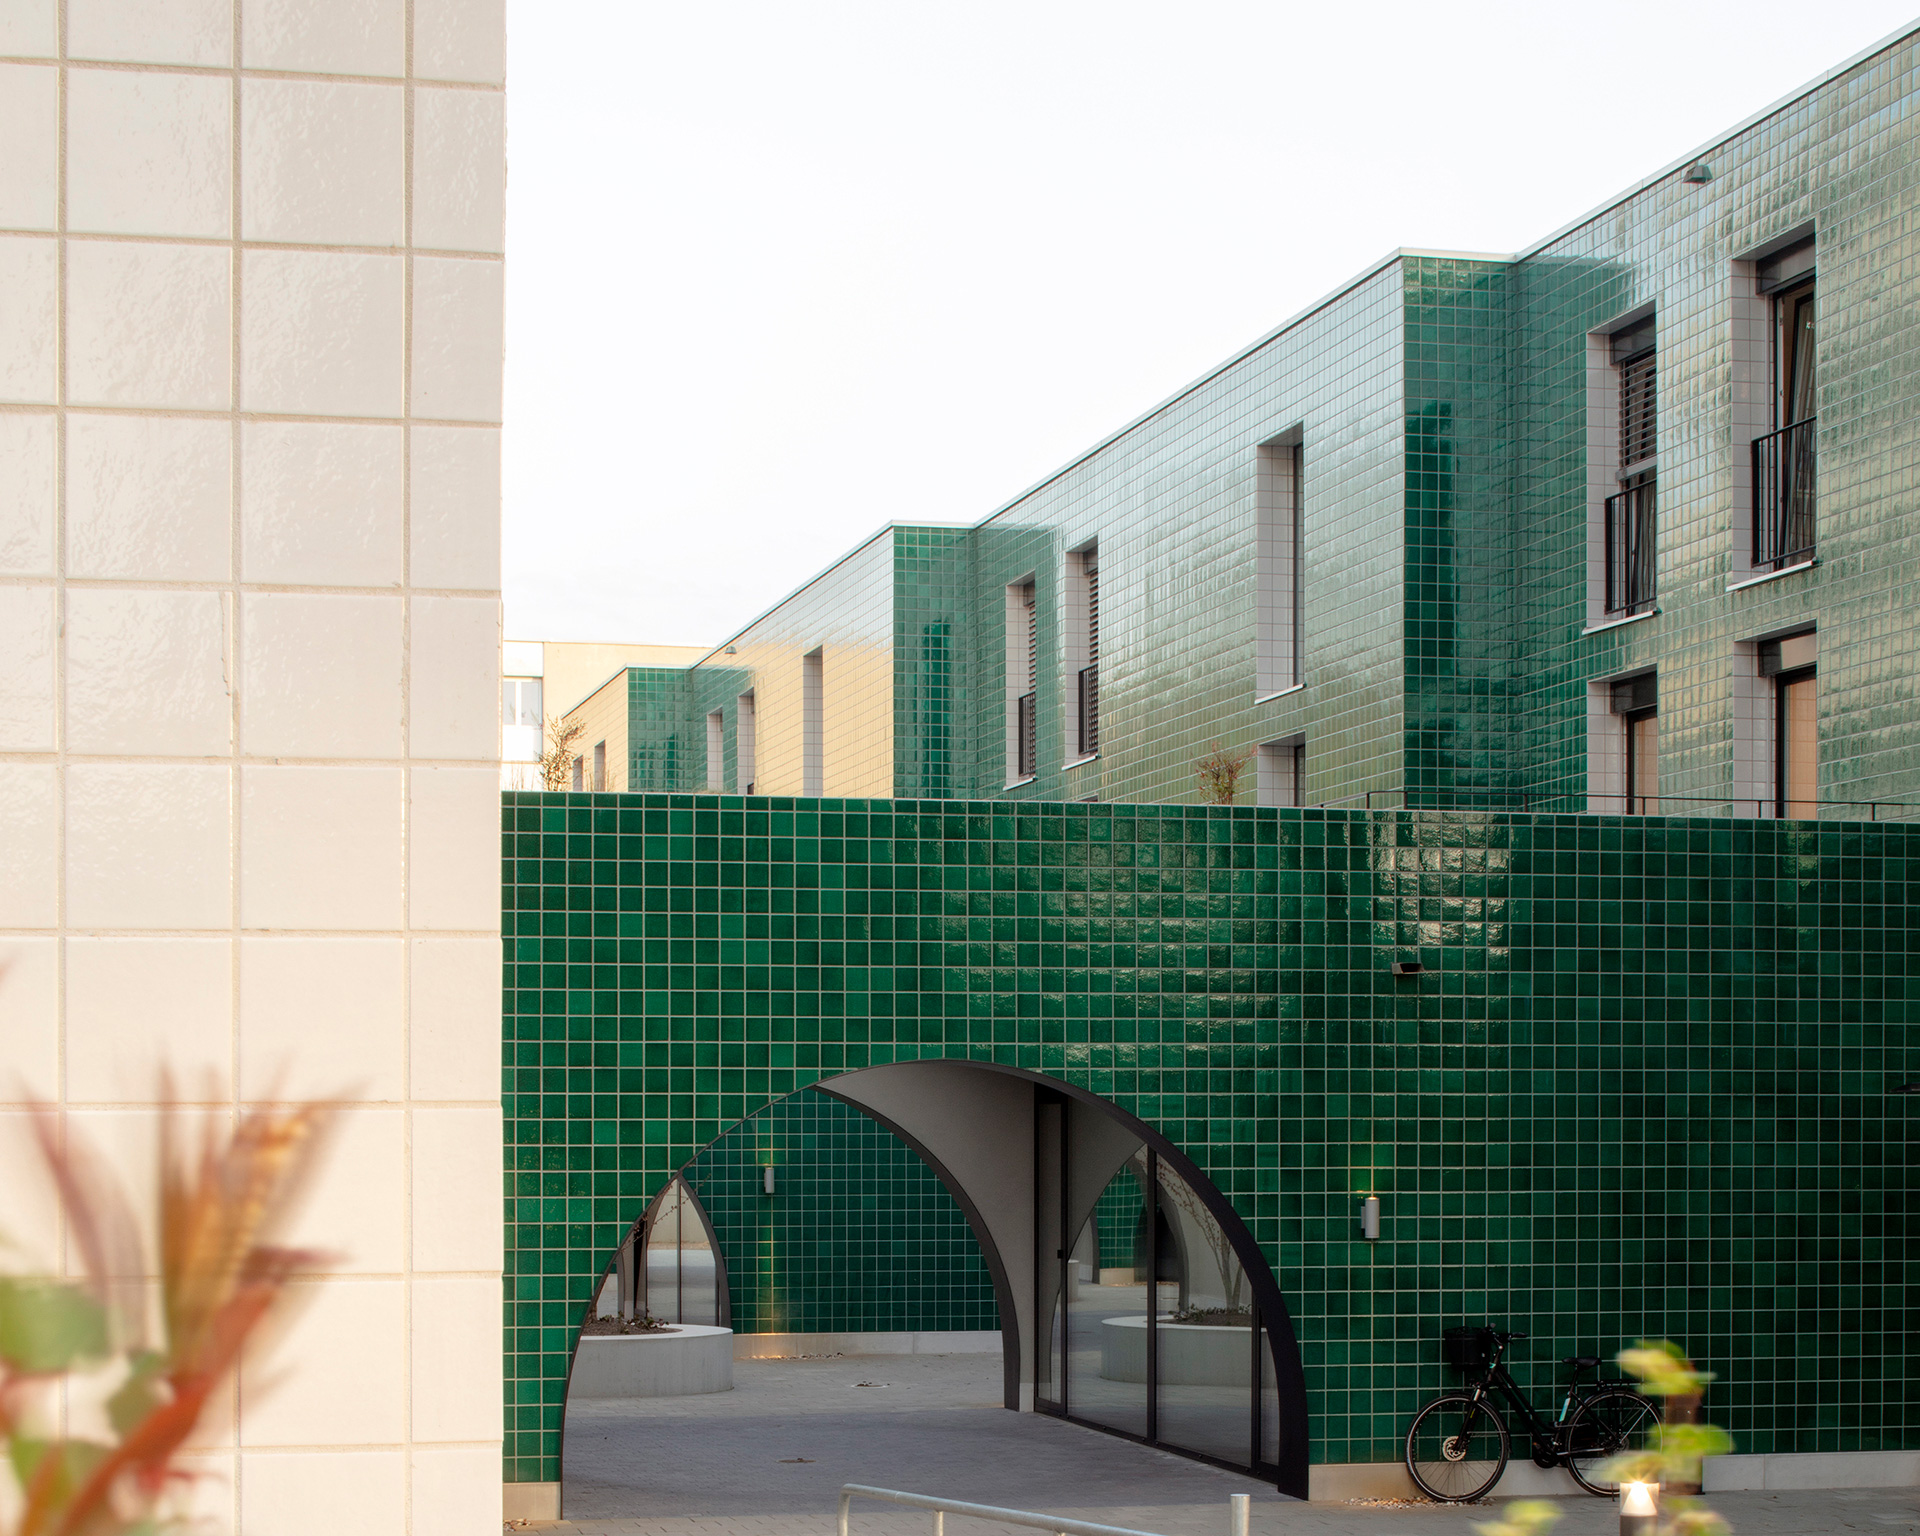 green tile clad building with an arched entryway